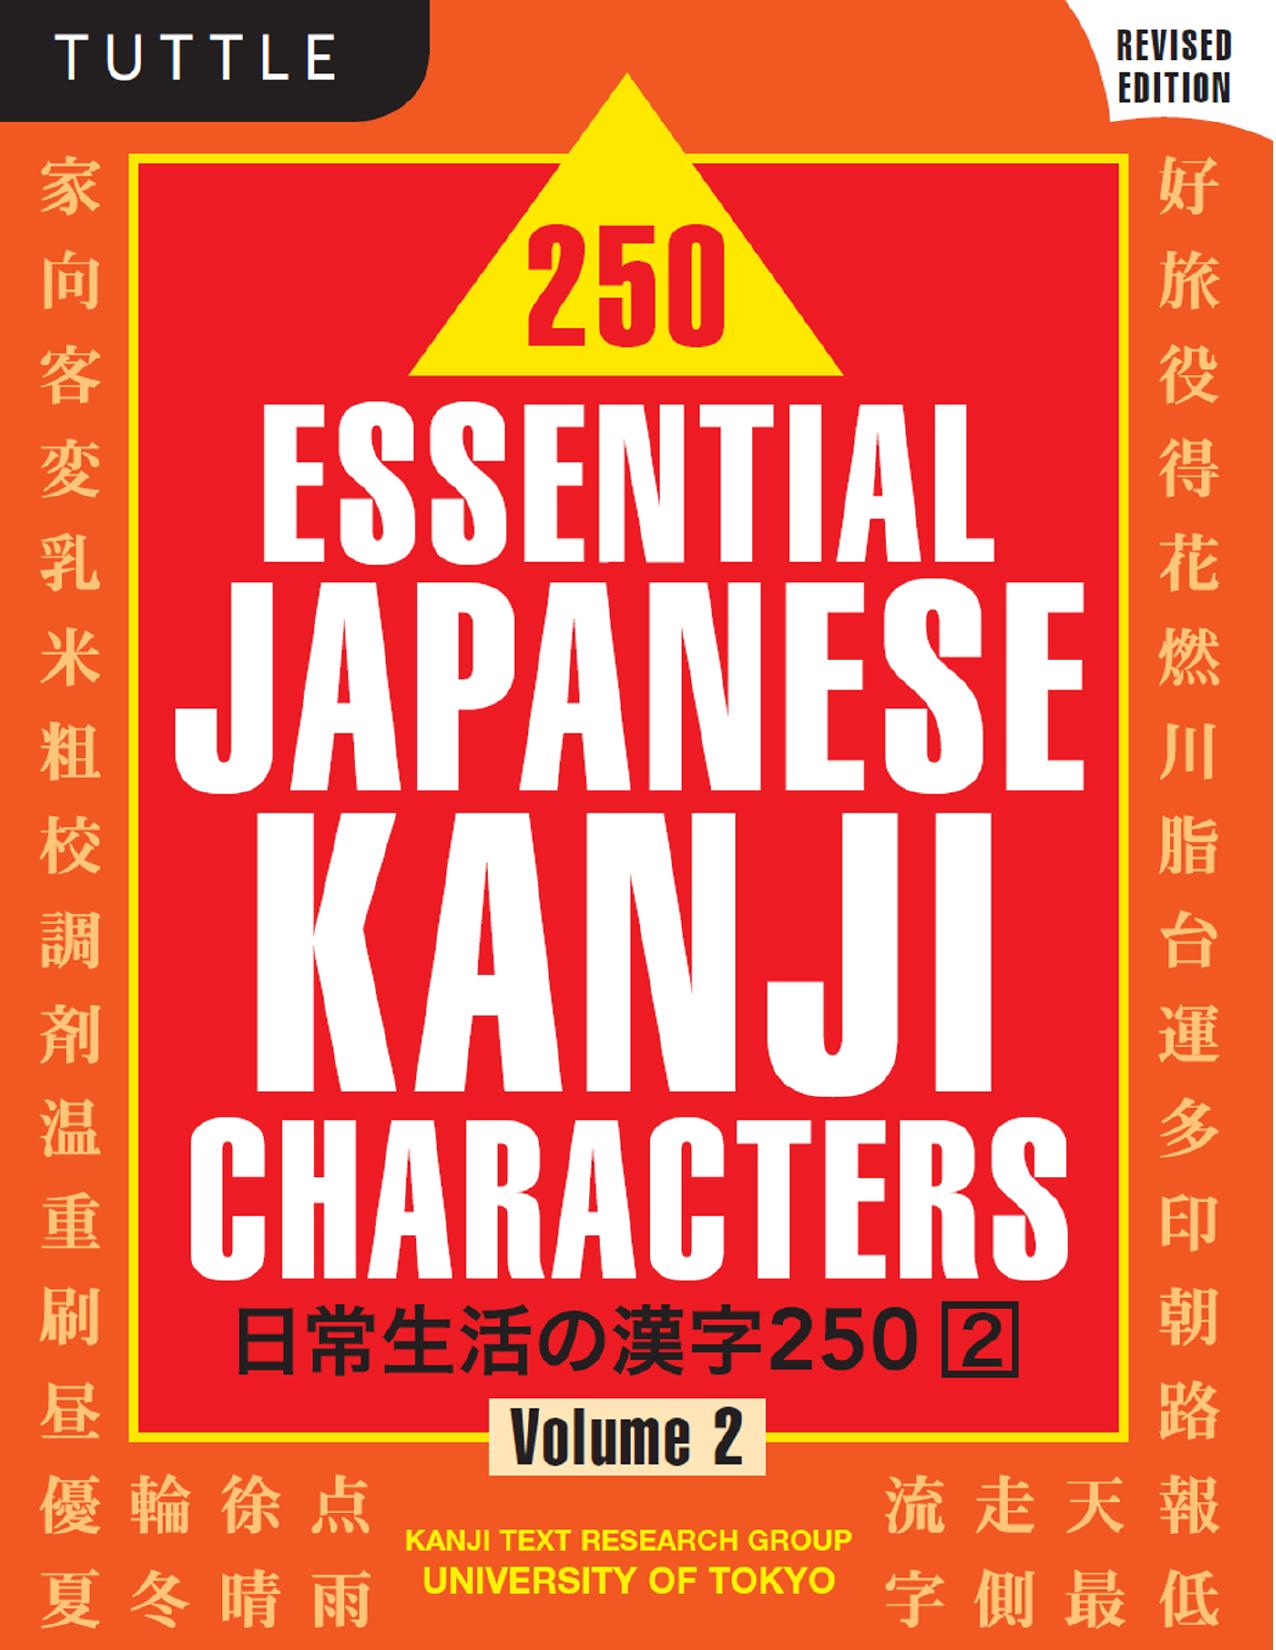 250 Essential Japanese Kanji Characters Volume 2: Revised Edition (JLPT Level N4) The Japanese Characters Needed to Learn Japanese and Ace the Japanese Language Proficiency Test by Kanji Text Research Group Univ of Tokyo 